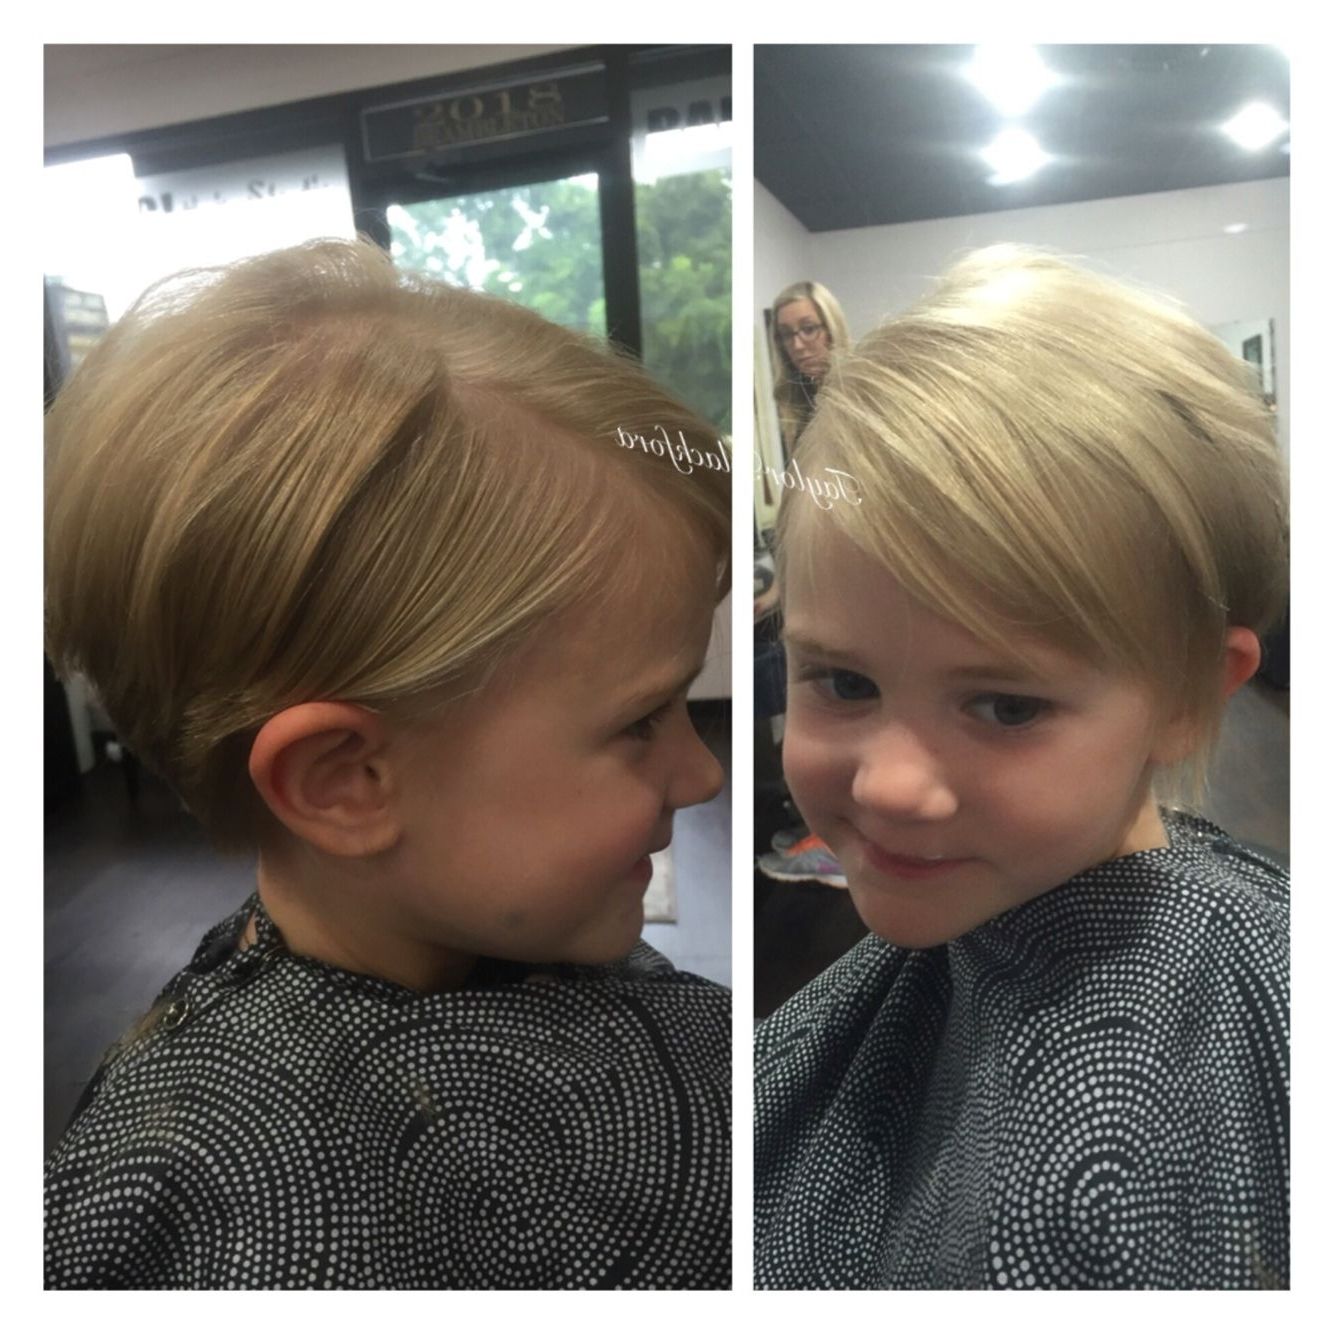 Precious Pixie Cut On This Little Girl! Perfect Haircut For Fine Within Most Up To Date Short Pixie Hairstyles For Little Girls (View 6 of 15)